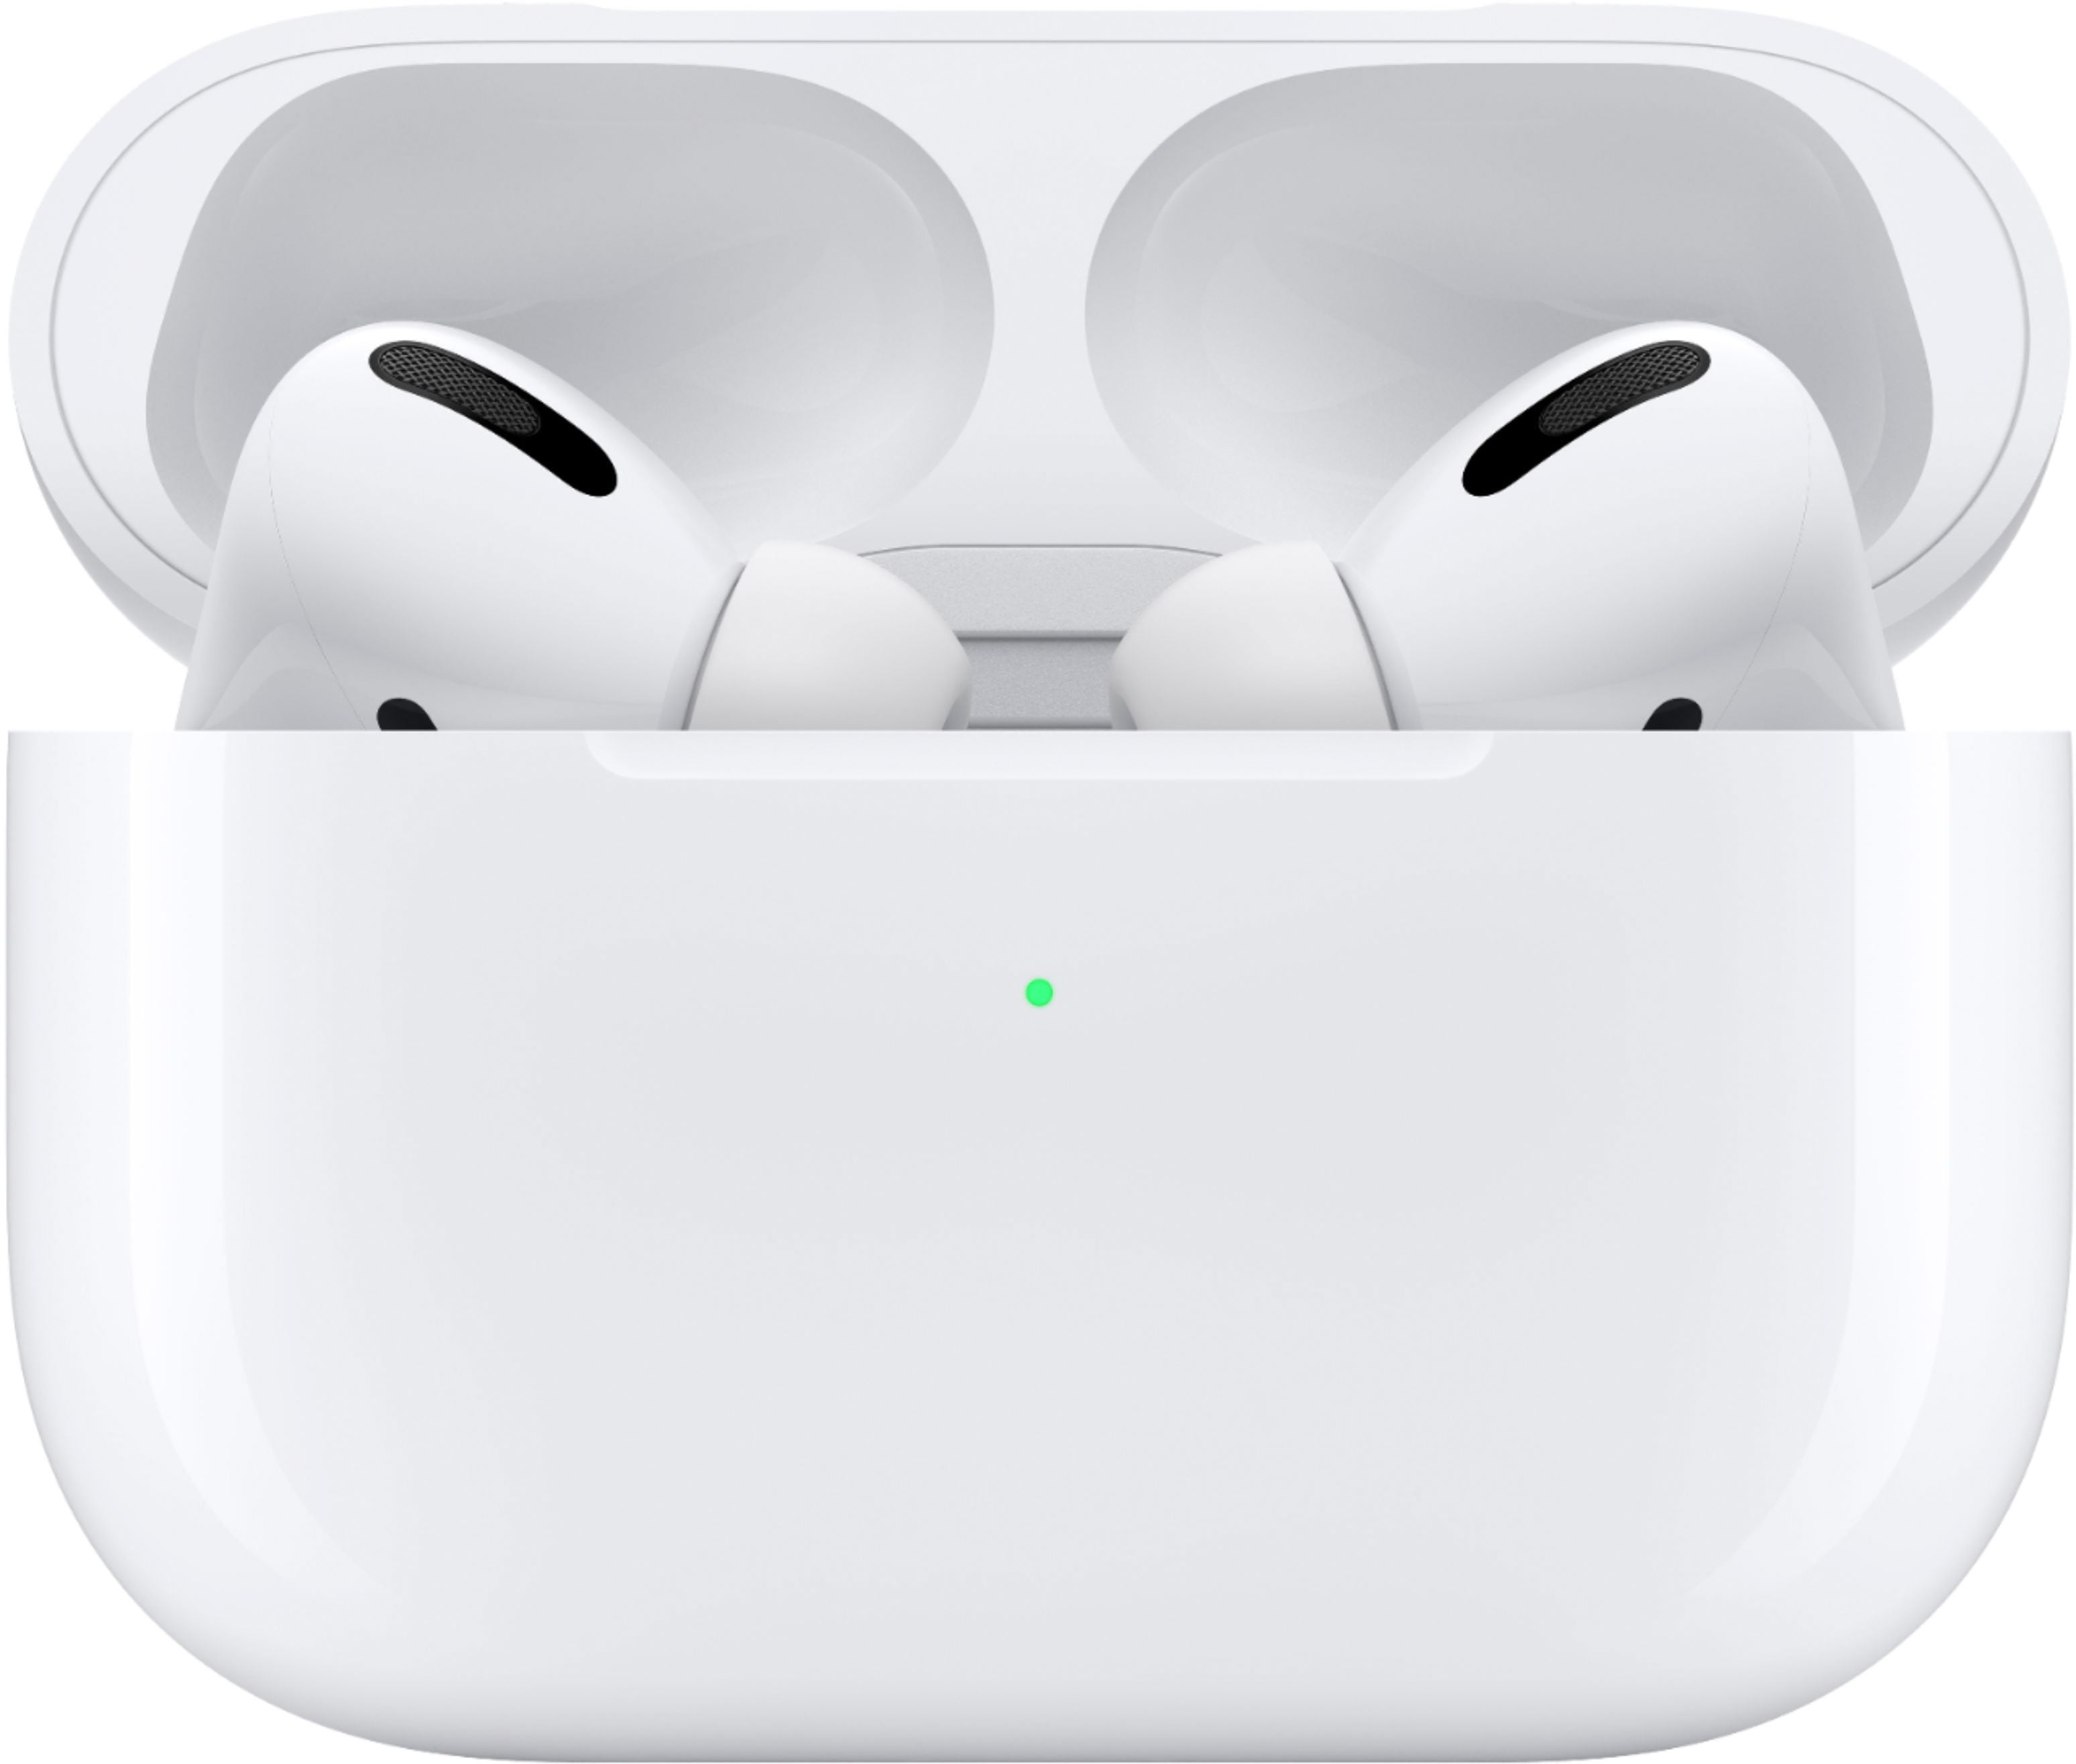 Plante træer Krage Uforenelig Restored Apple AirPods Pro White with Magsafe Charging Case In Ear  Headphones MLWK3AM/A (Refurbished) - Walmart.com